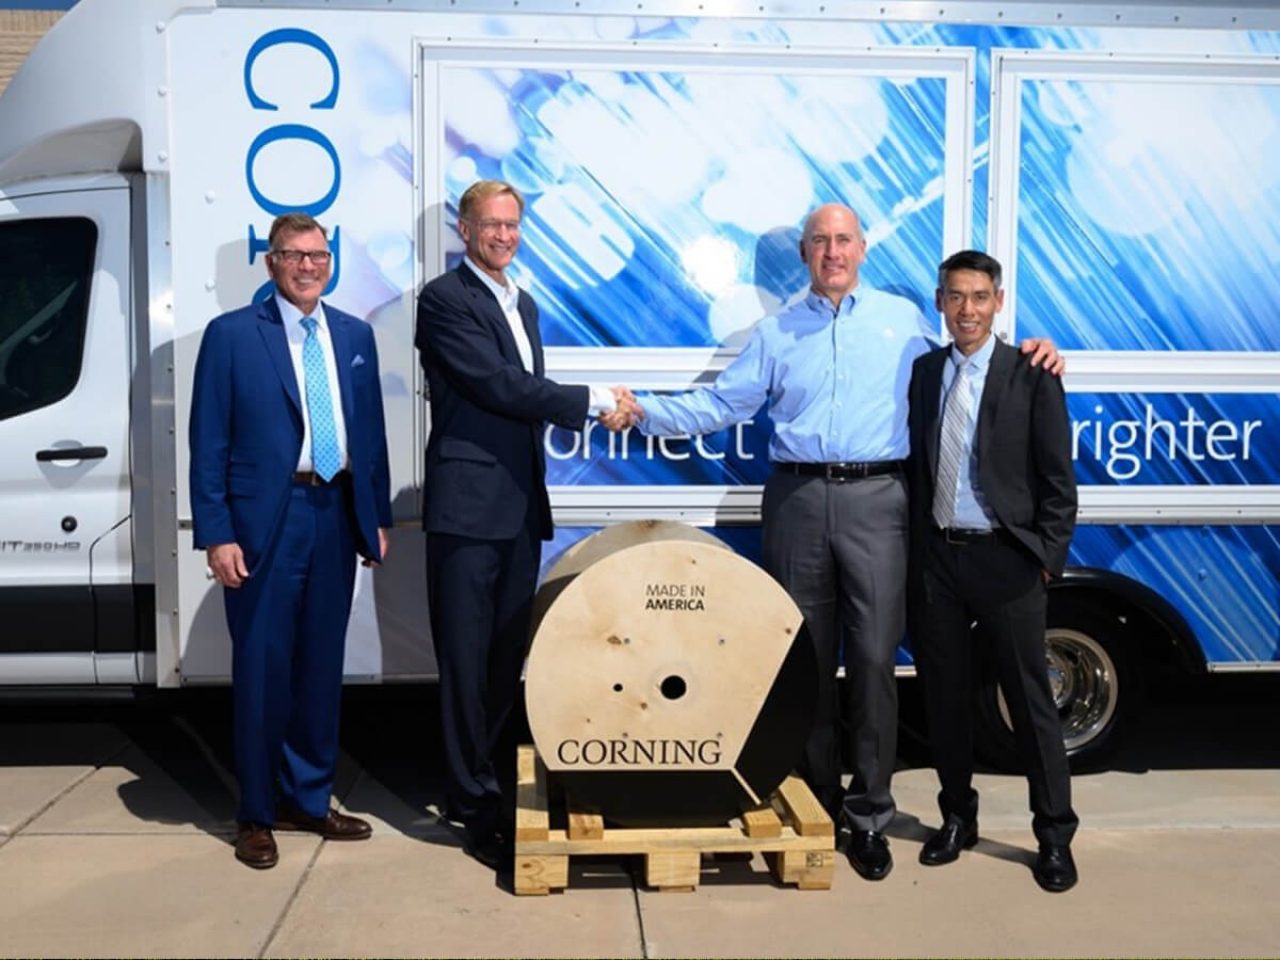 Wendell and Mike shake hands while accompanied by two colleagues. They stand in front of a truck featuring blue Corning livery, with a cable reel on the ground.